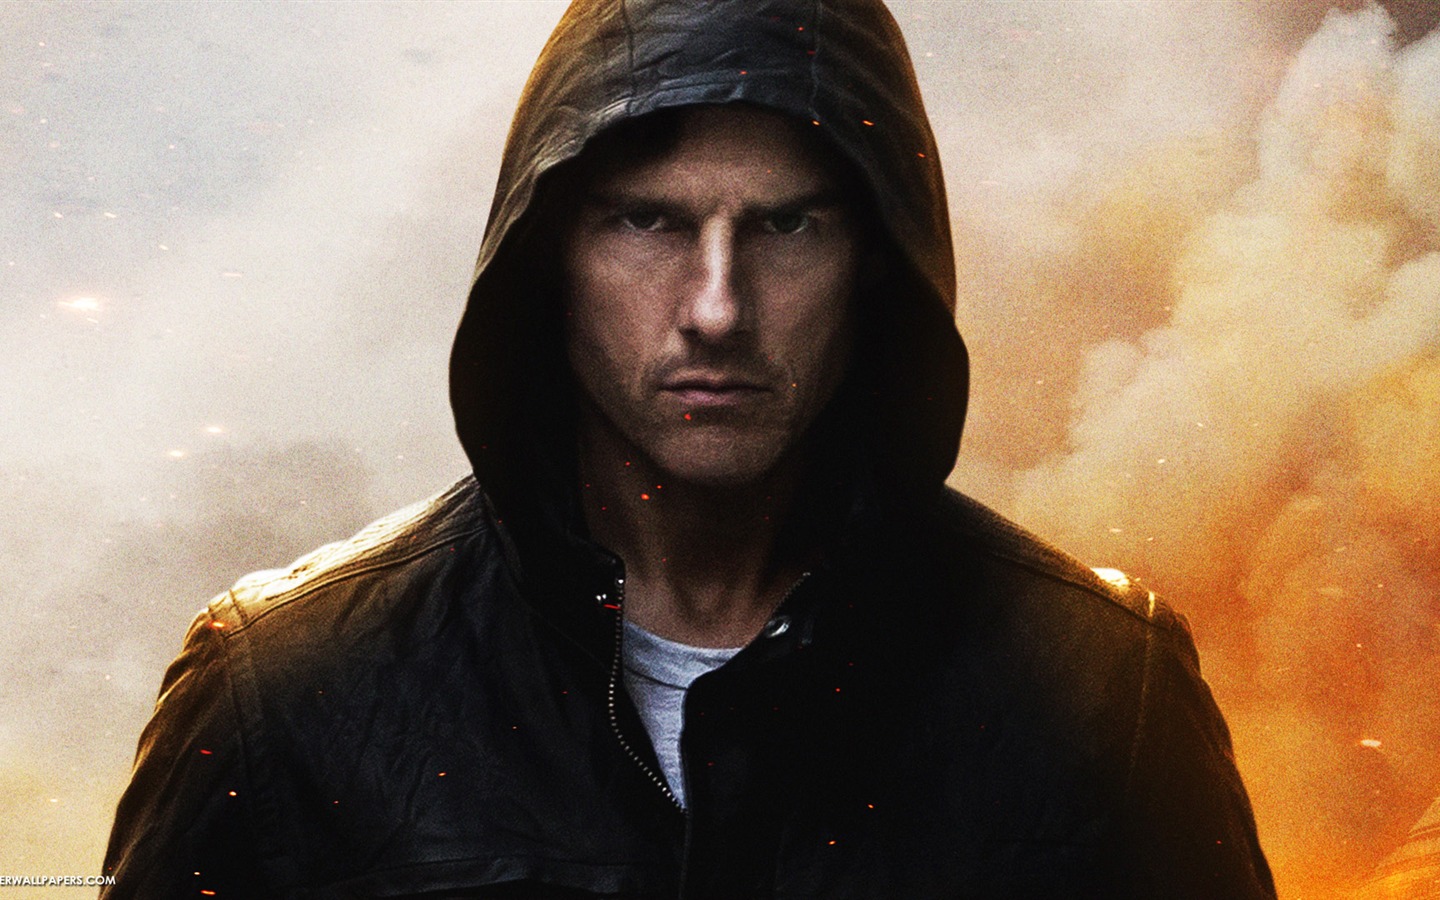 Mission: Impossible - Ghost Protocol 碟中谍4 高清壁纸3 - 1440x900